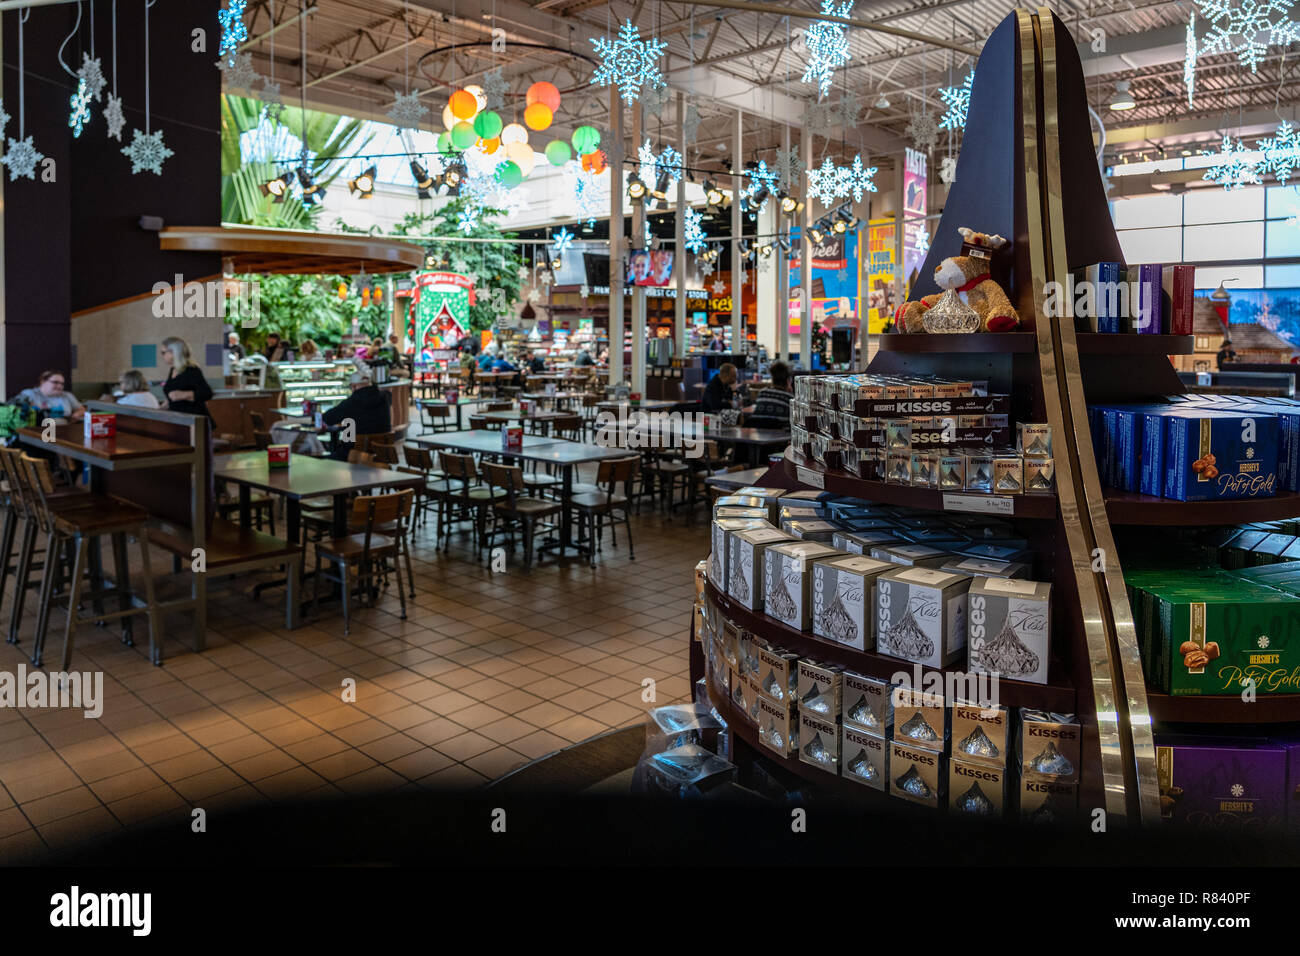 Hershey, PA, USA - December 11, 2018:  Inside Chocolate World, there are exhibits, ride, products, and a food court for tourists to visit. Stock Photo